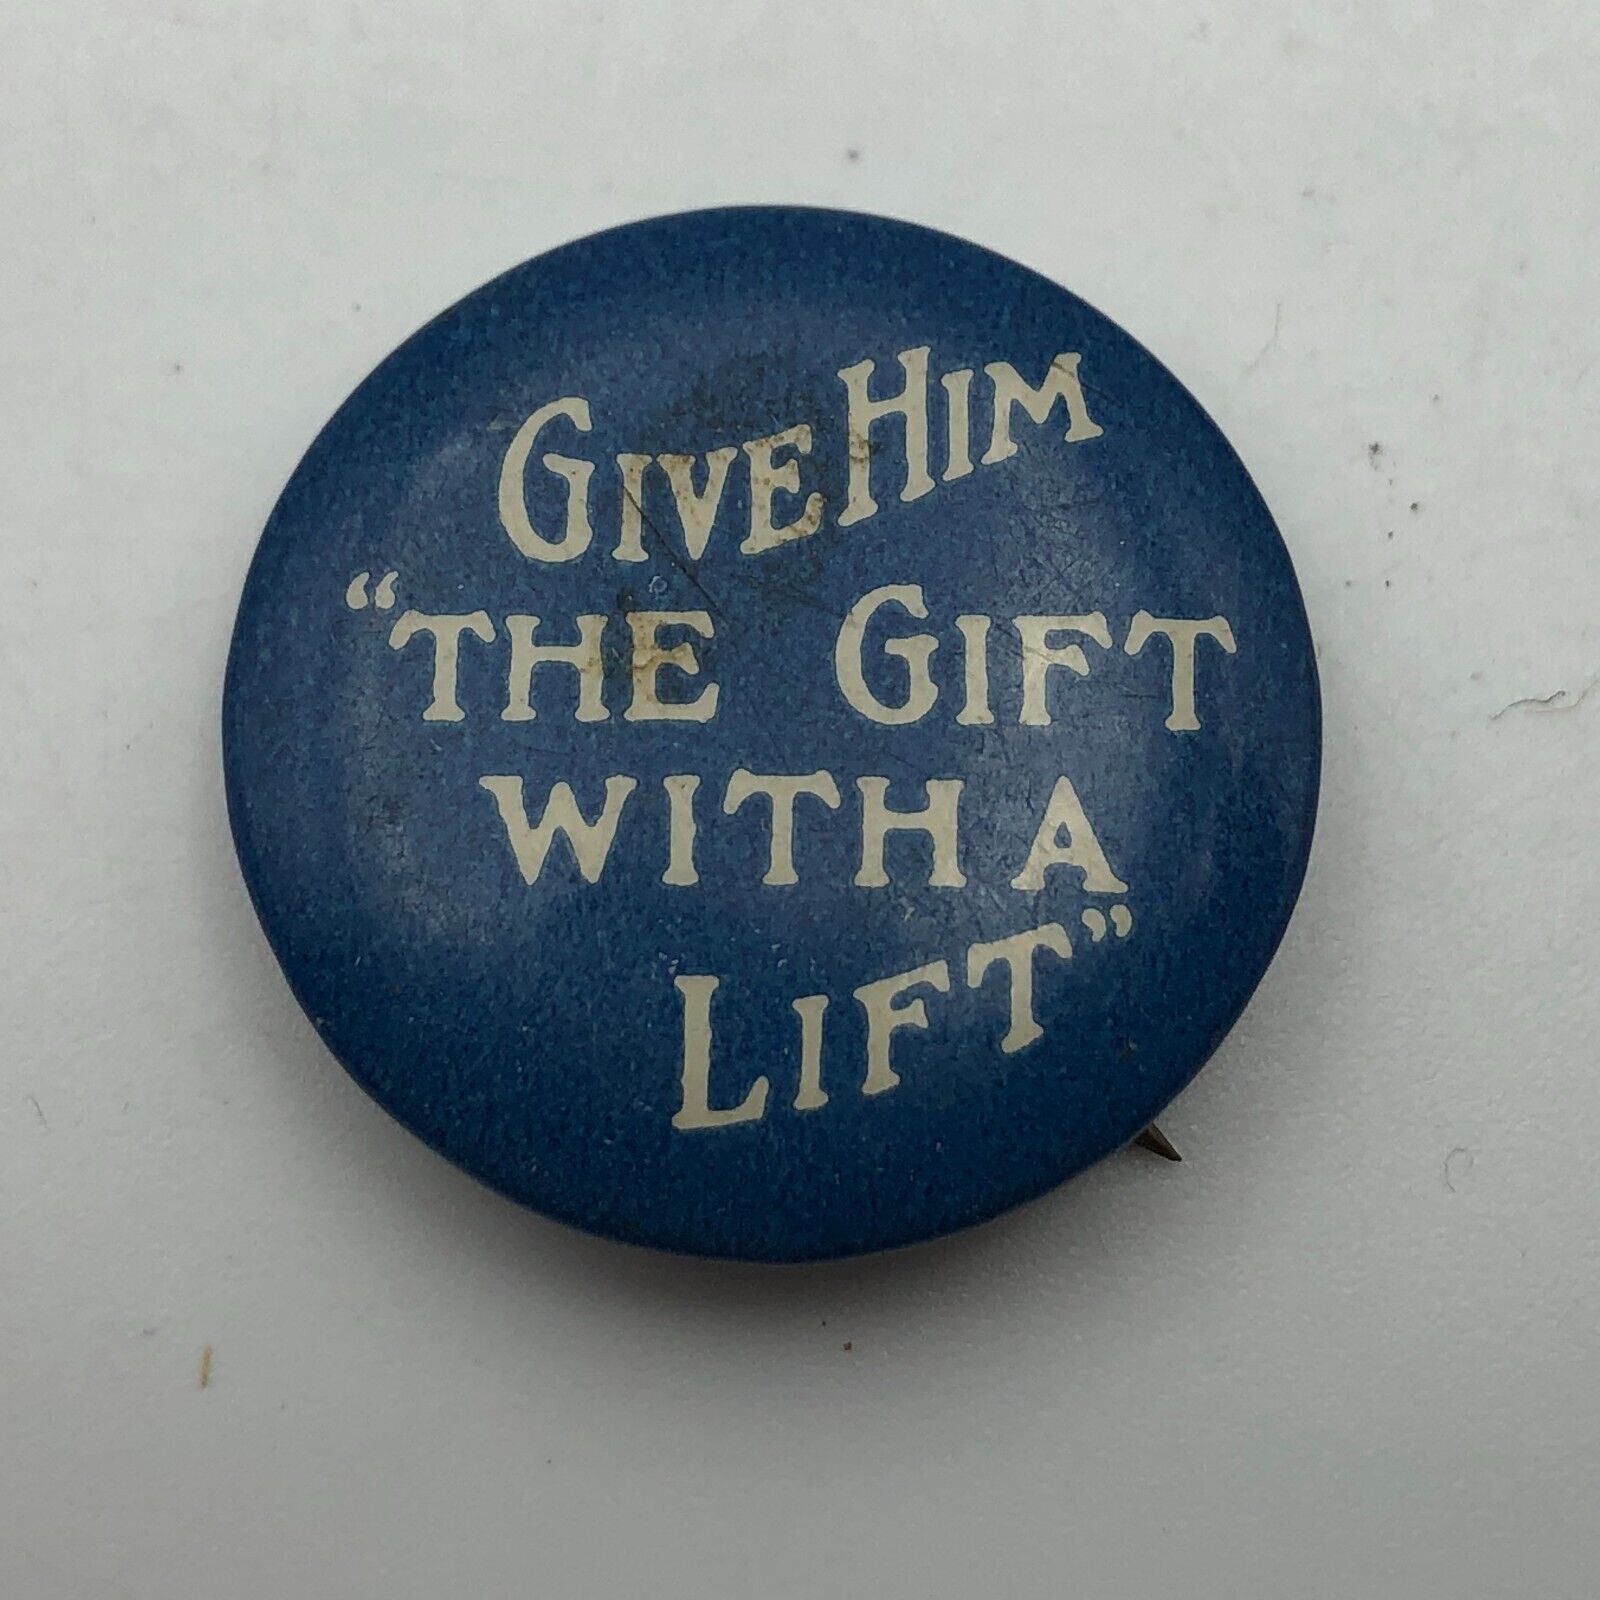 Vtg Parker Pens Advertising Button Pin Pinback Give Him The Gift With A Lift M9